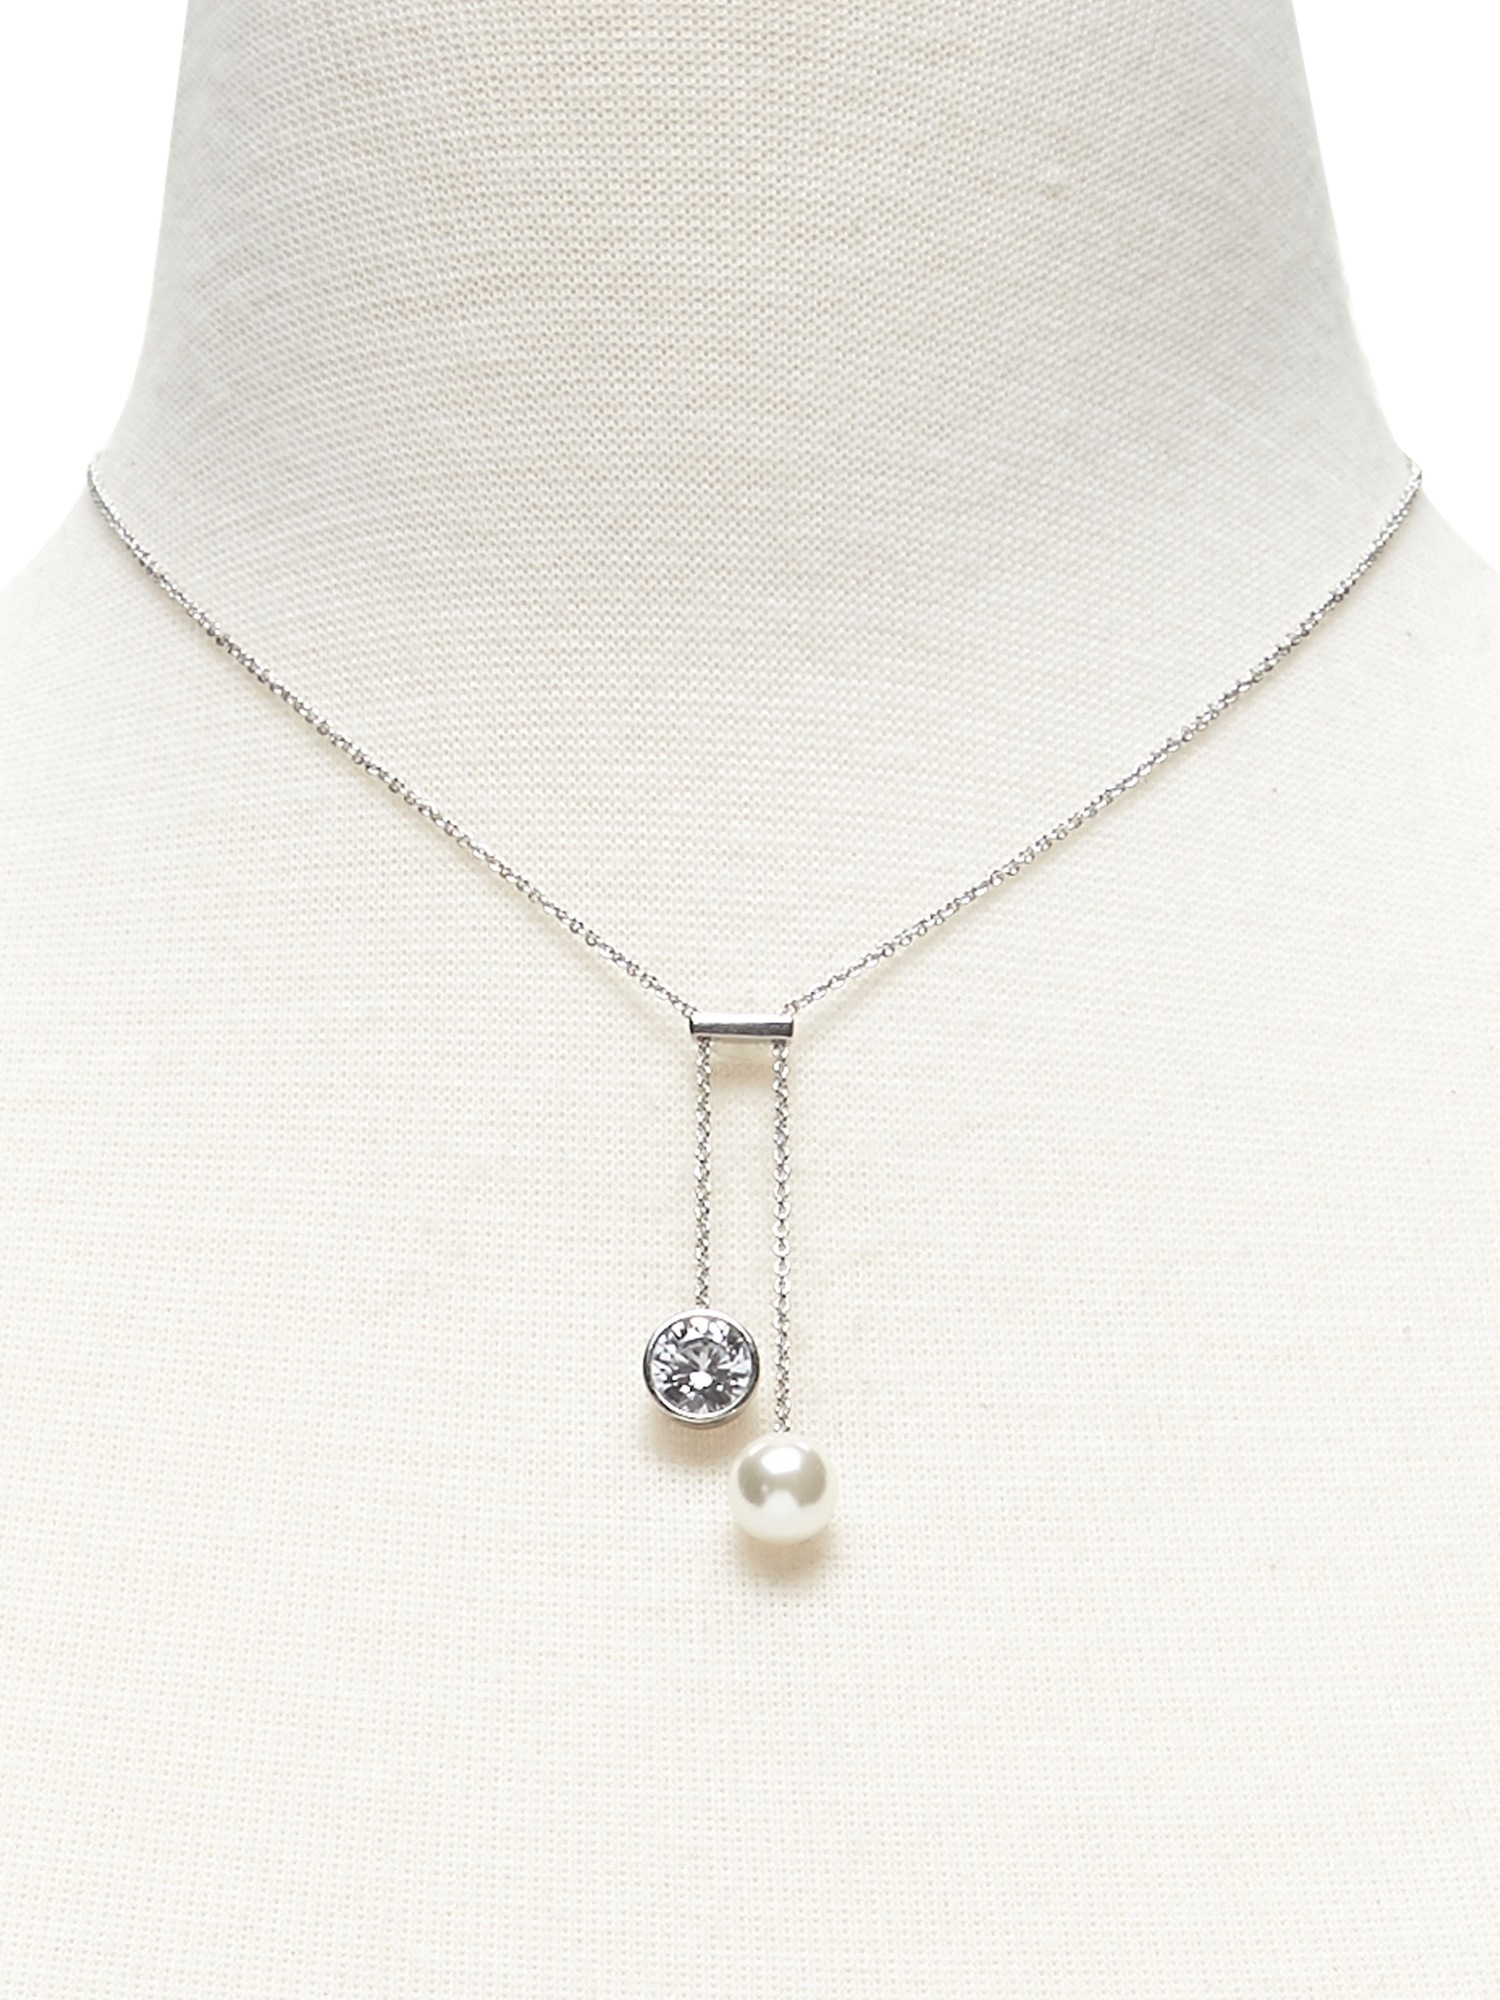 Modern Pearl and Stone Pendant Necklace